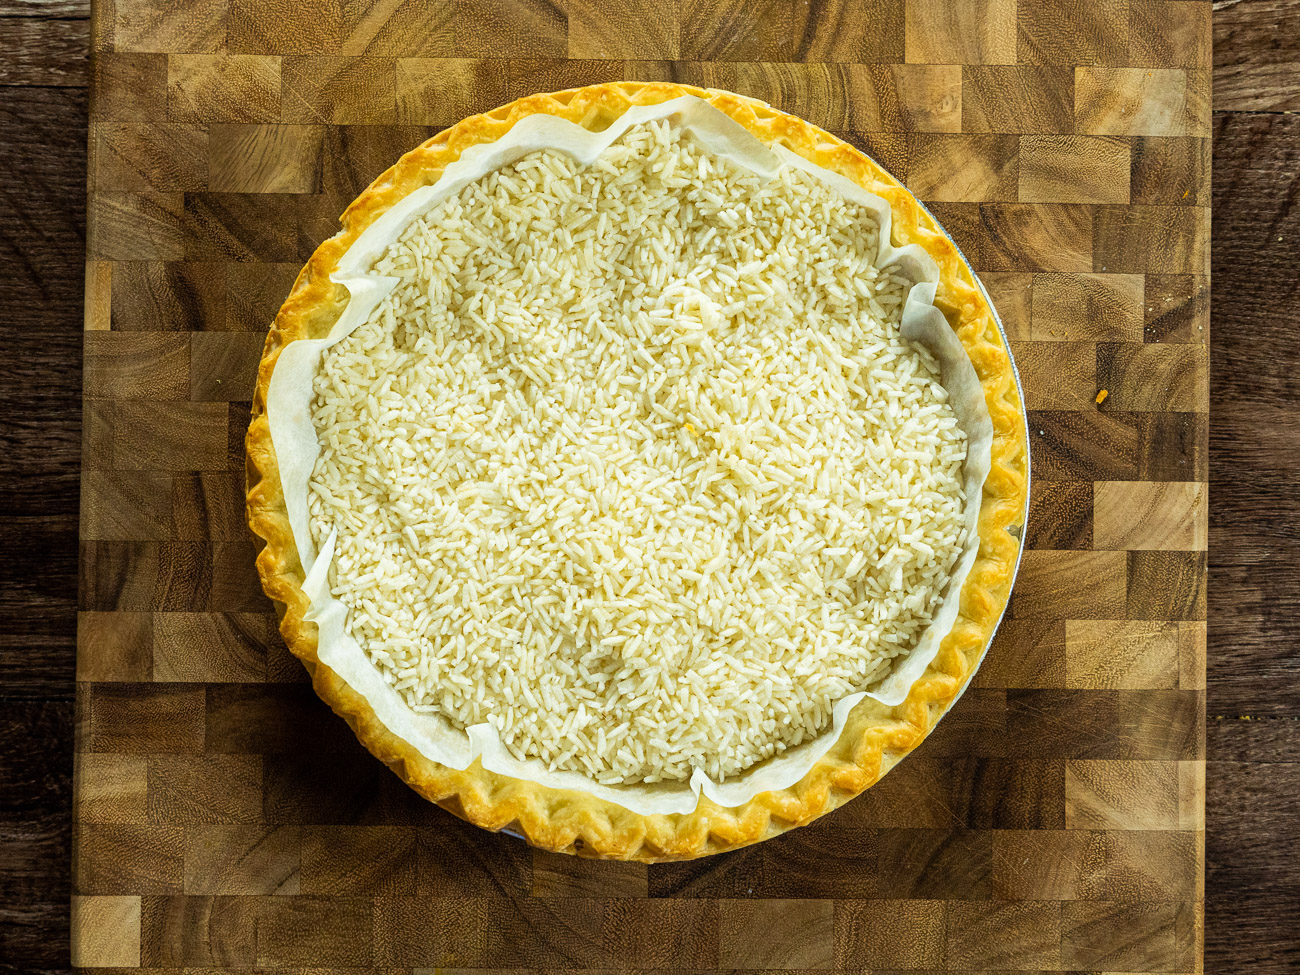 Preheat oven to 450˚F. Line pie shell with parchment paper and fill with pie weights or rice. Prebake pie crust for 8 minutes and then lower heat to 375˚ and bake for another 5-7 minutes.